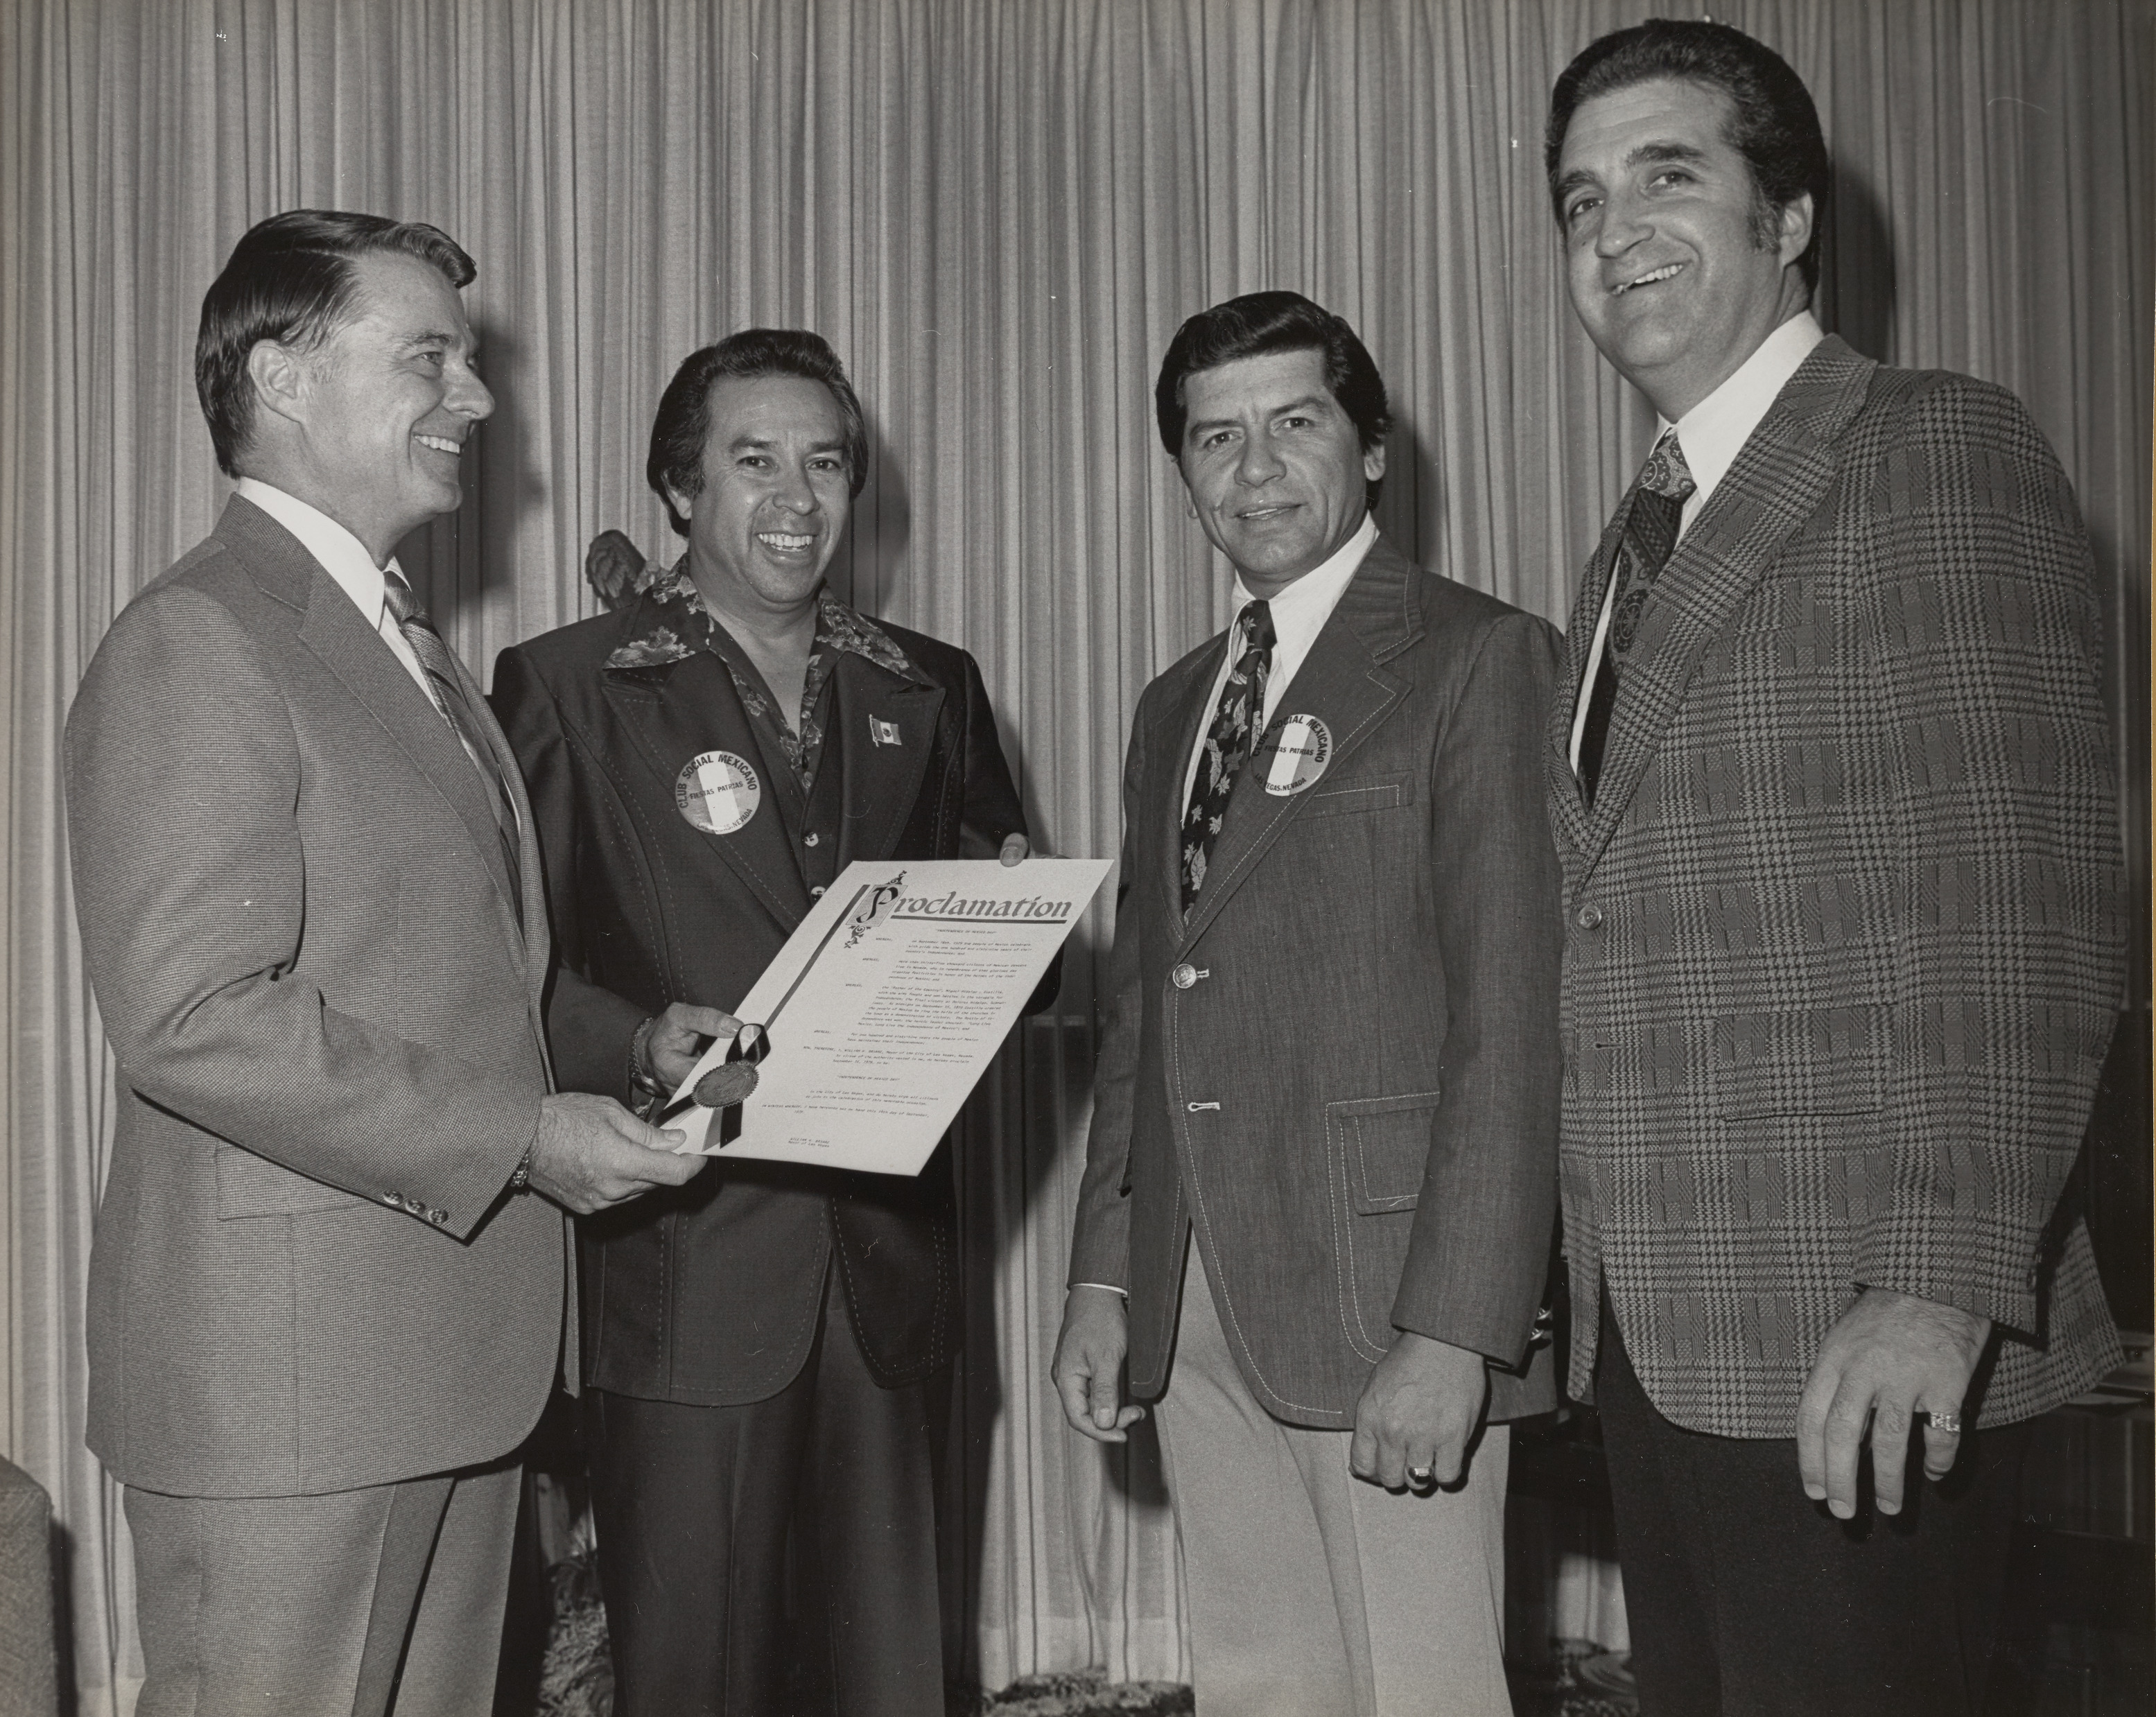 Photograph of Mayor Briare and Ron Lurie giving Proclamation to members of Club Social Mexicano